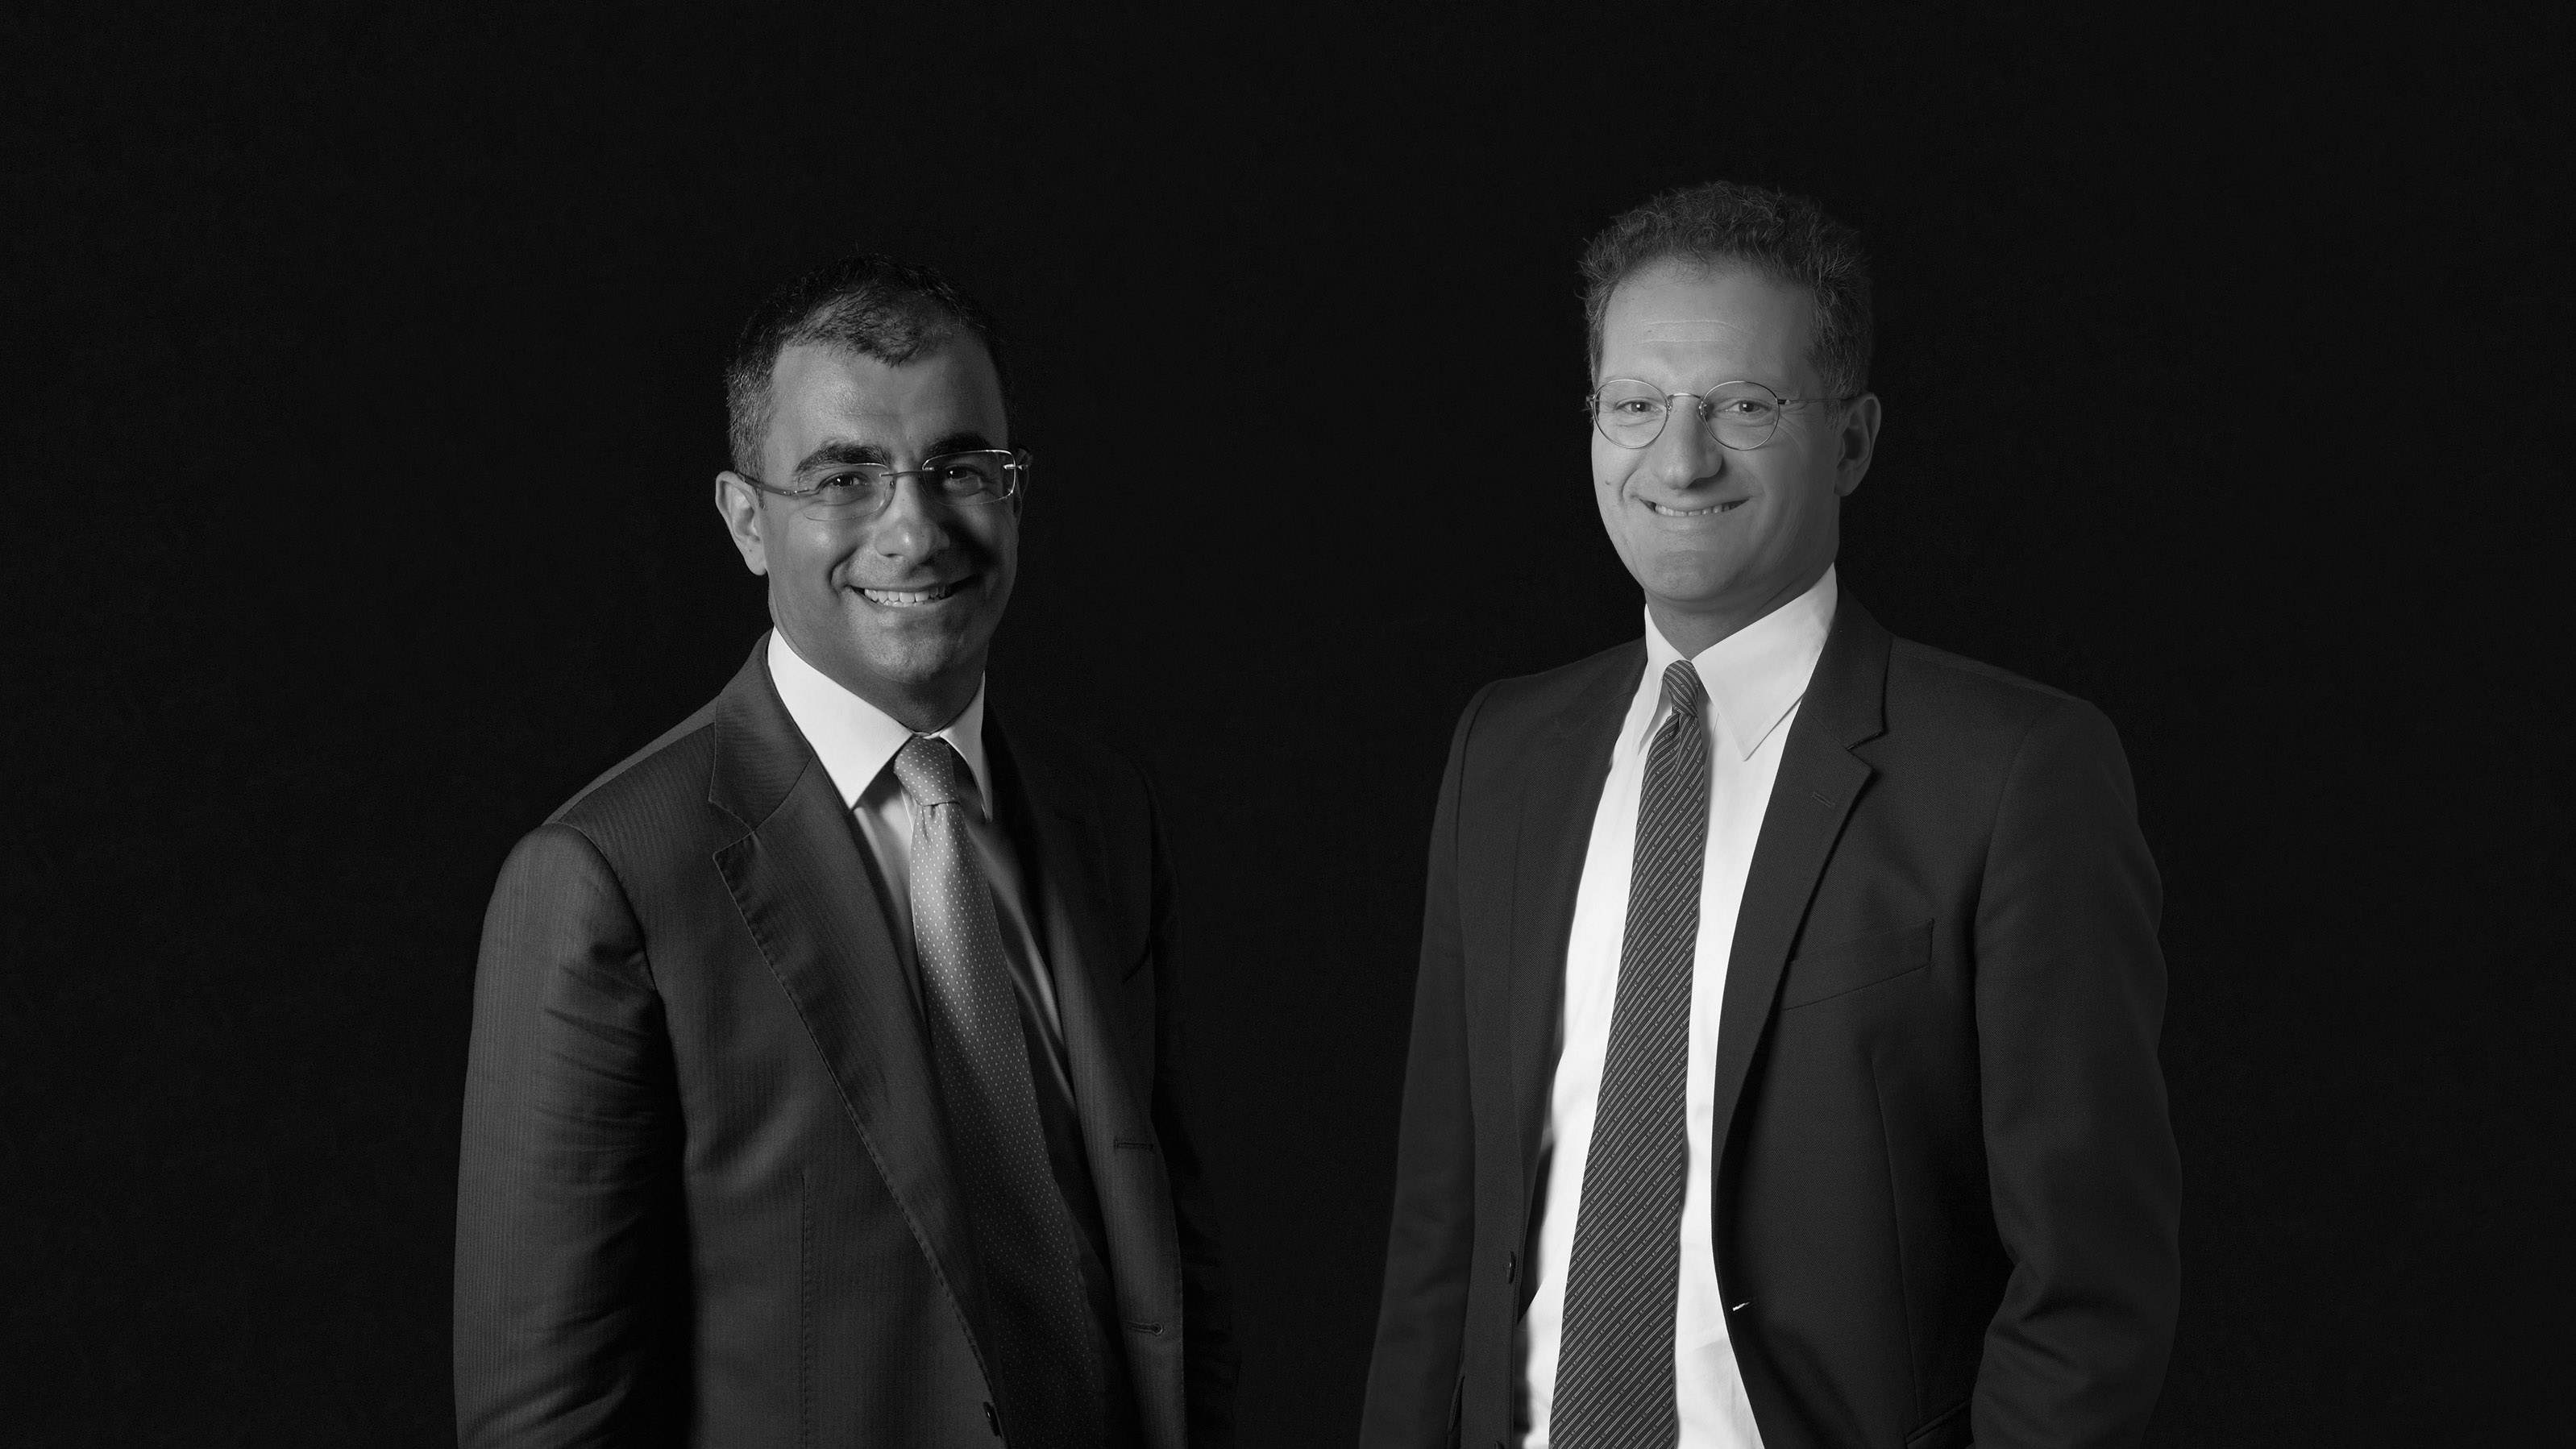 Two new Partners for Chiomenti: Francesco D'Alessandro and Marco Paruzzolo